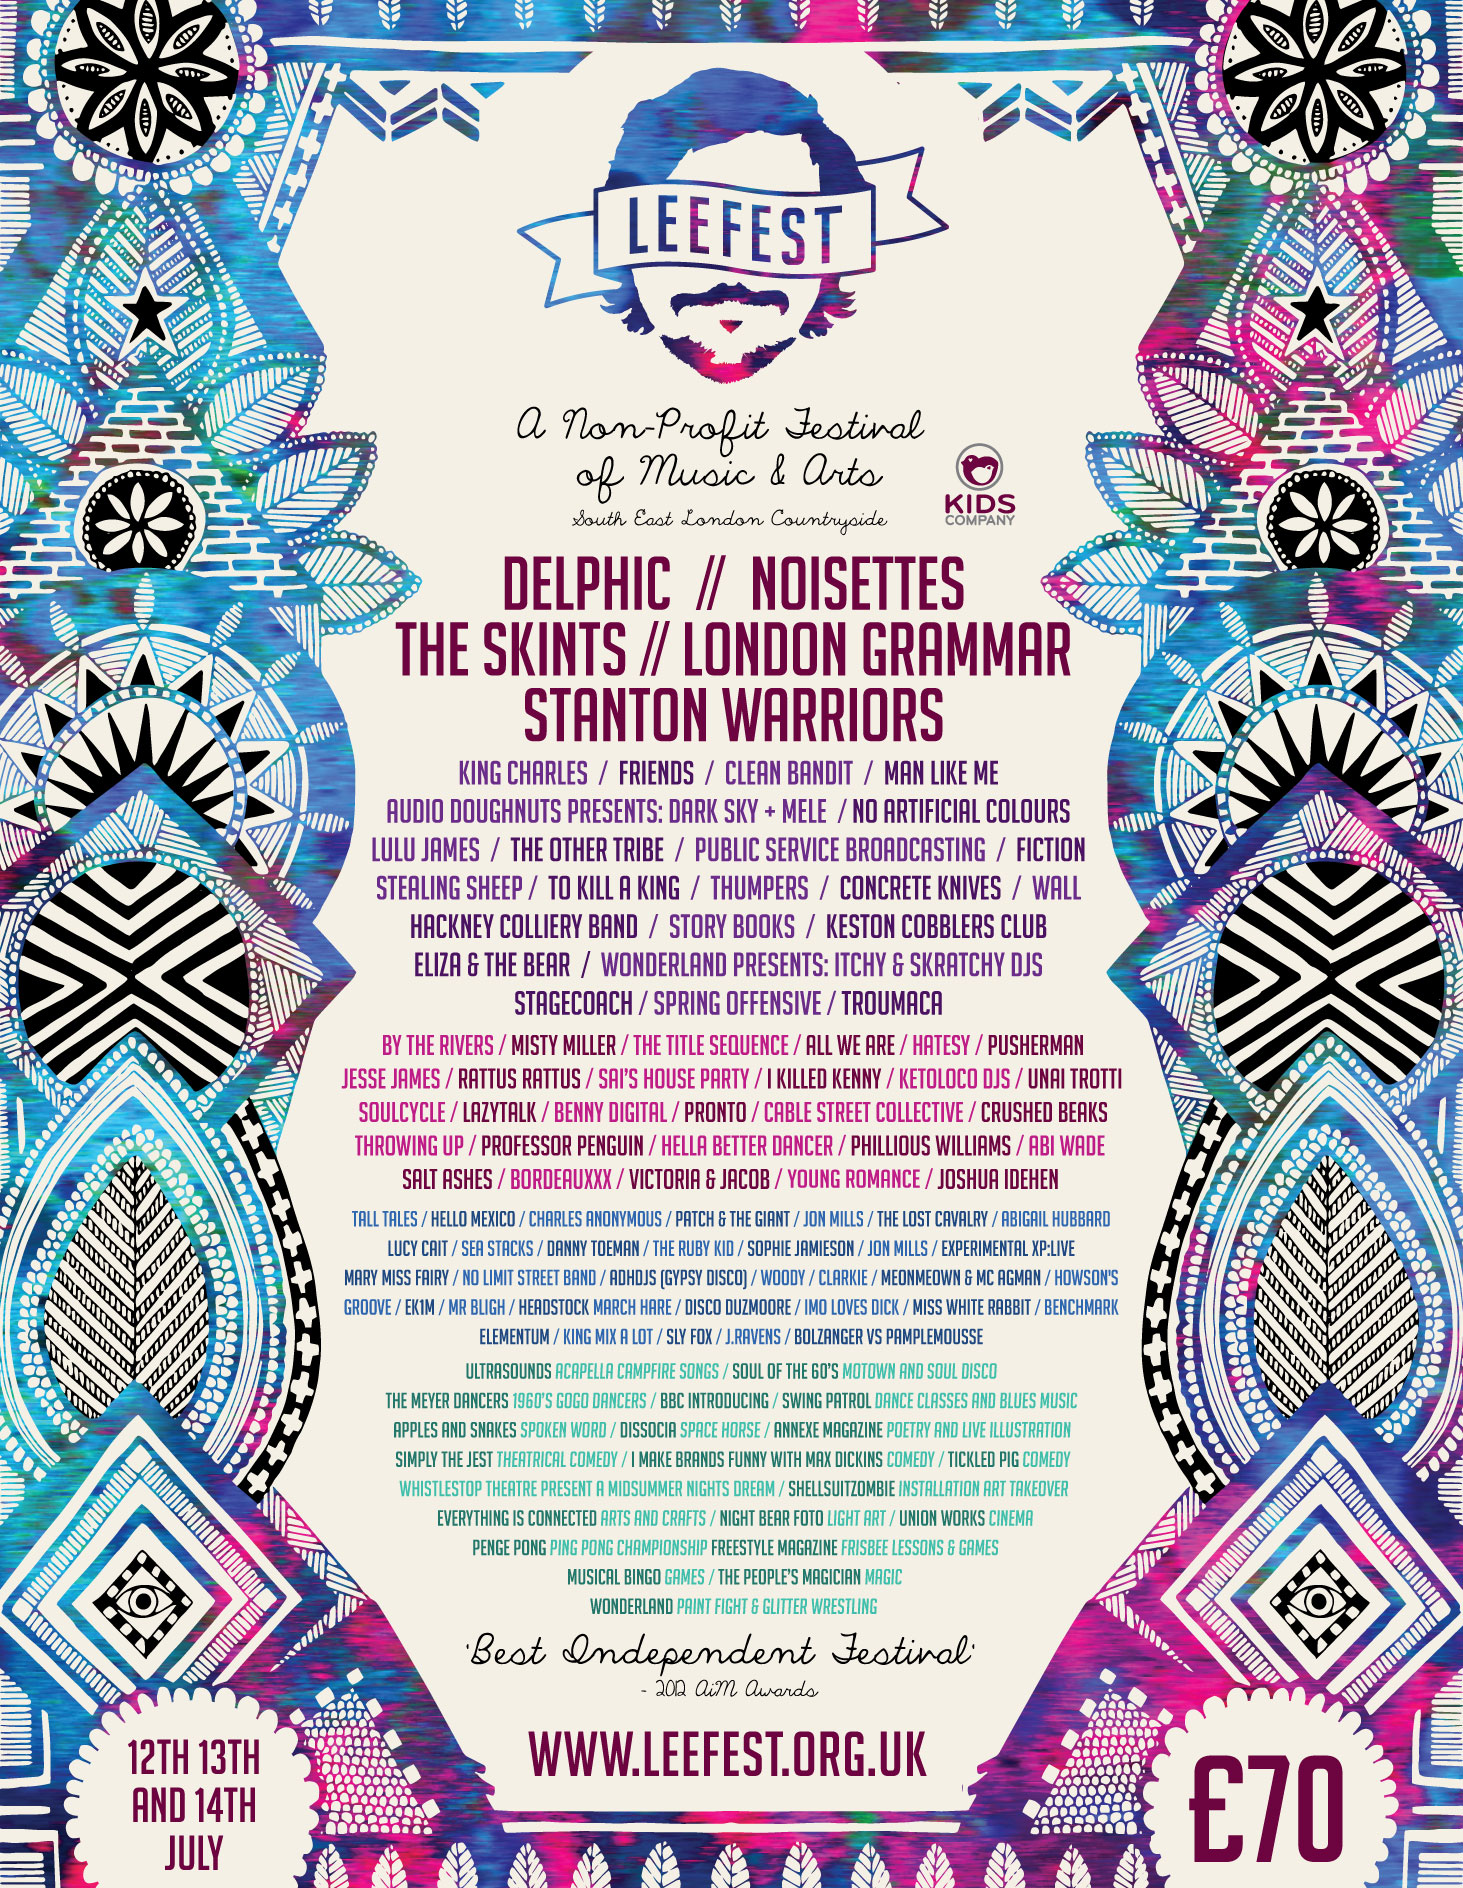 The Skints & London Grammar join Noisettes, Delphic and Stealing Sheep at LEEFEST